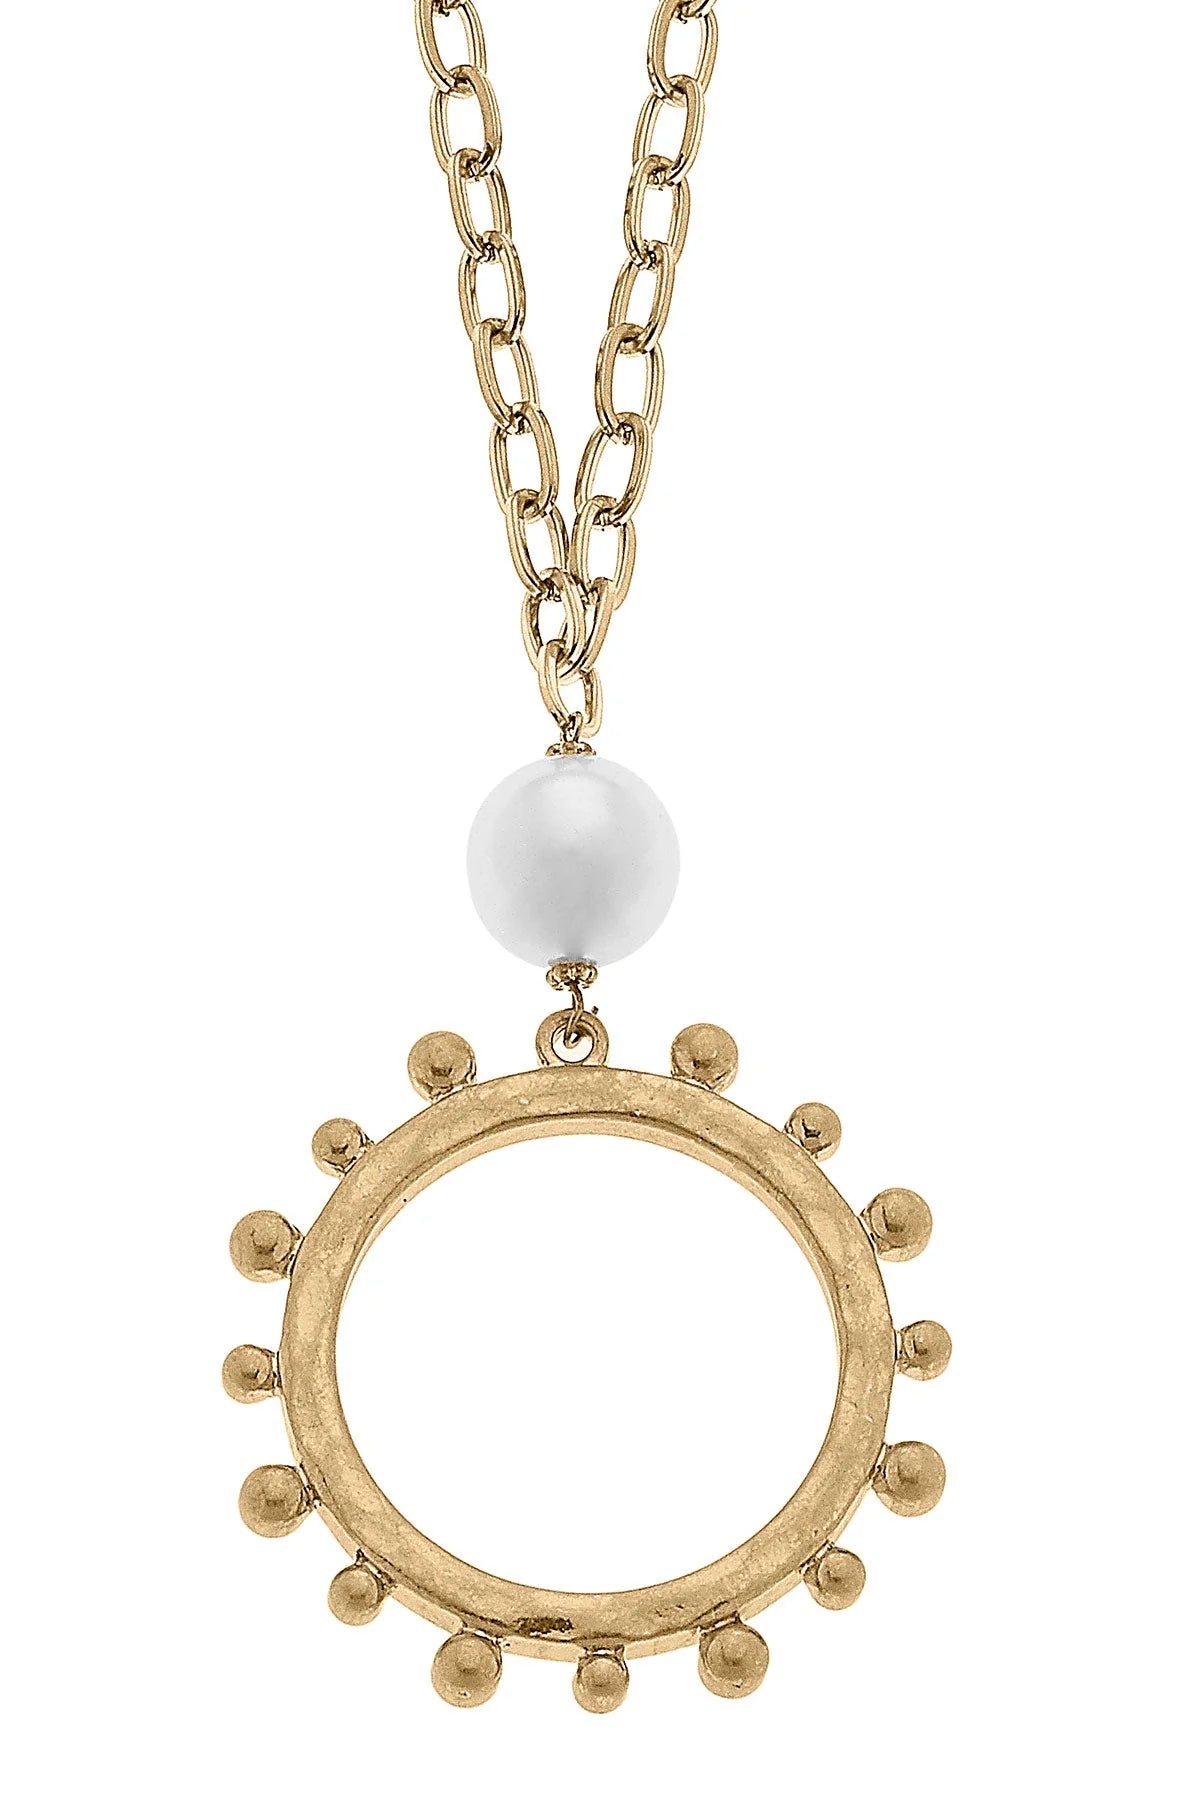 Melanie Studded Circle Necklace Gold-410 Jewelry-Simply Stylish Boutique-Simply Stylish Boutique | Women’s & Kid’s Fashion | Paducah, KY